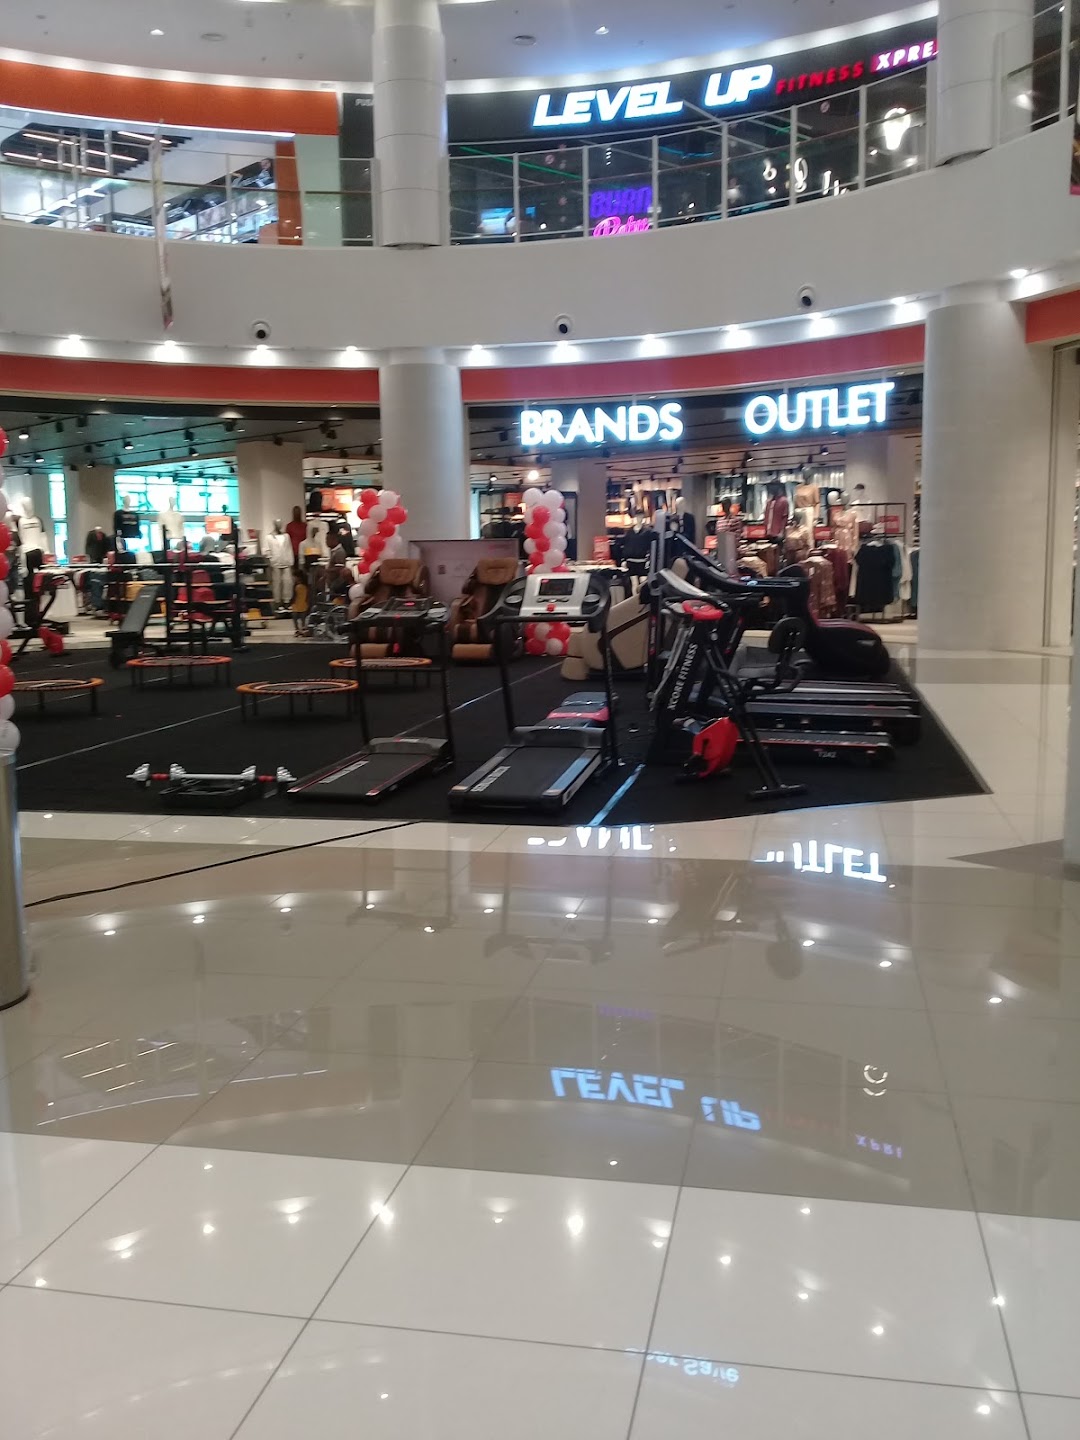 Brands Outlet AEON Mall Kuching Central